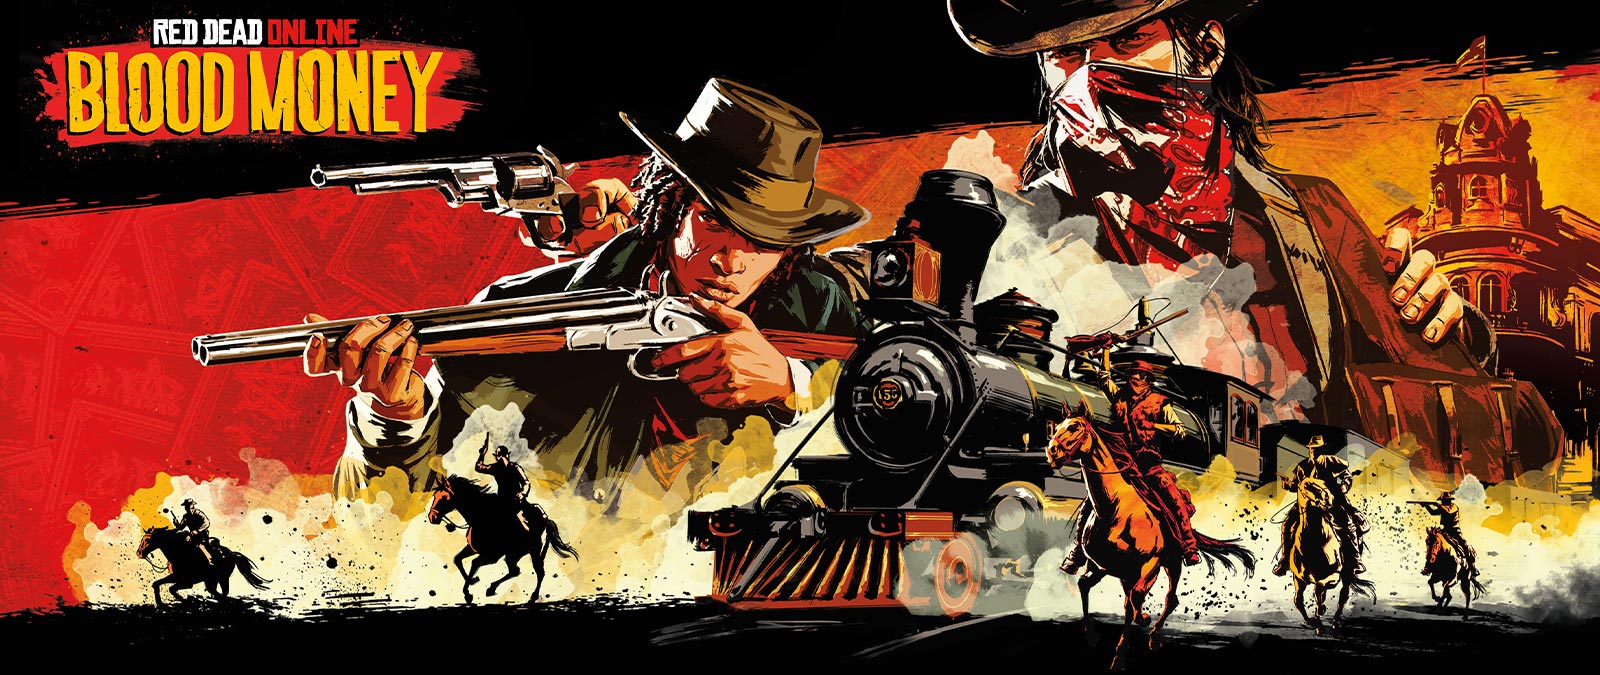 Red Dead Online, Moonshiners, A sinister looking man holds a gun and a stack of cash, stylistic background of a moonshiner set-up and a wagon chase. 